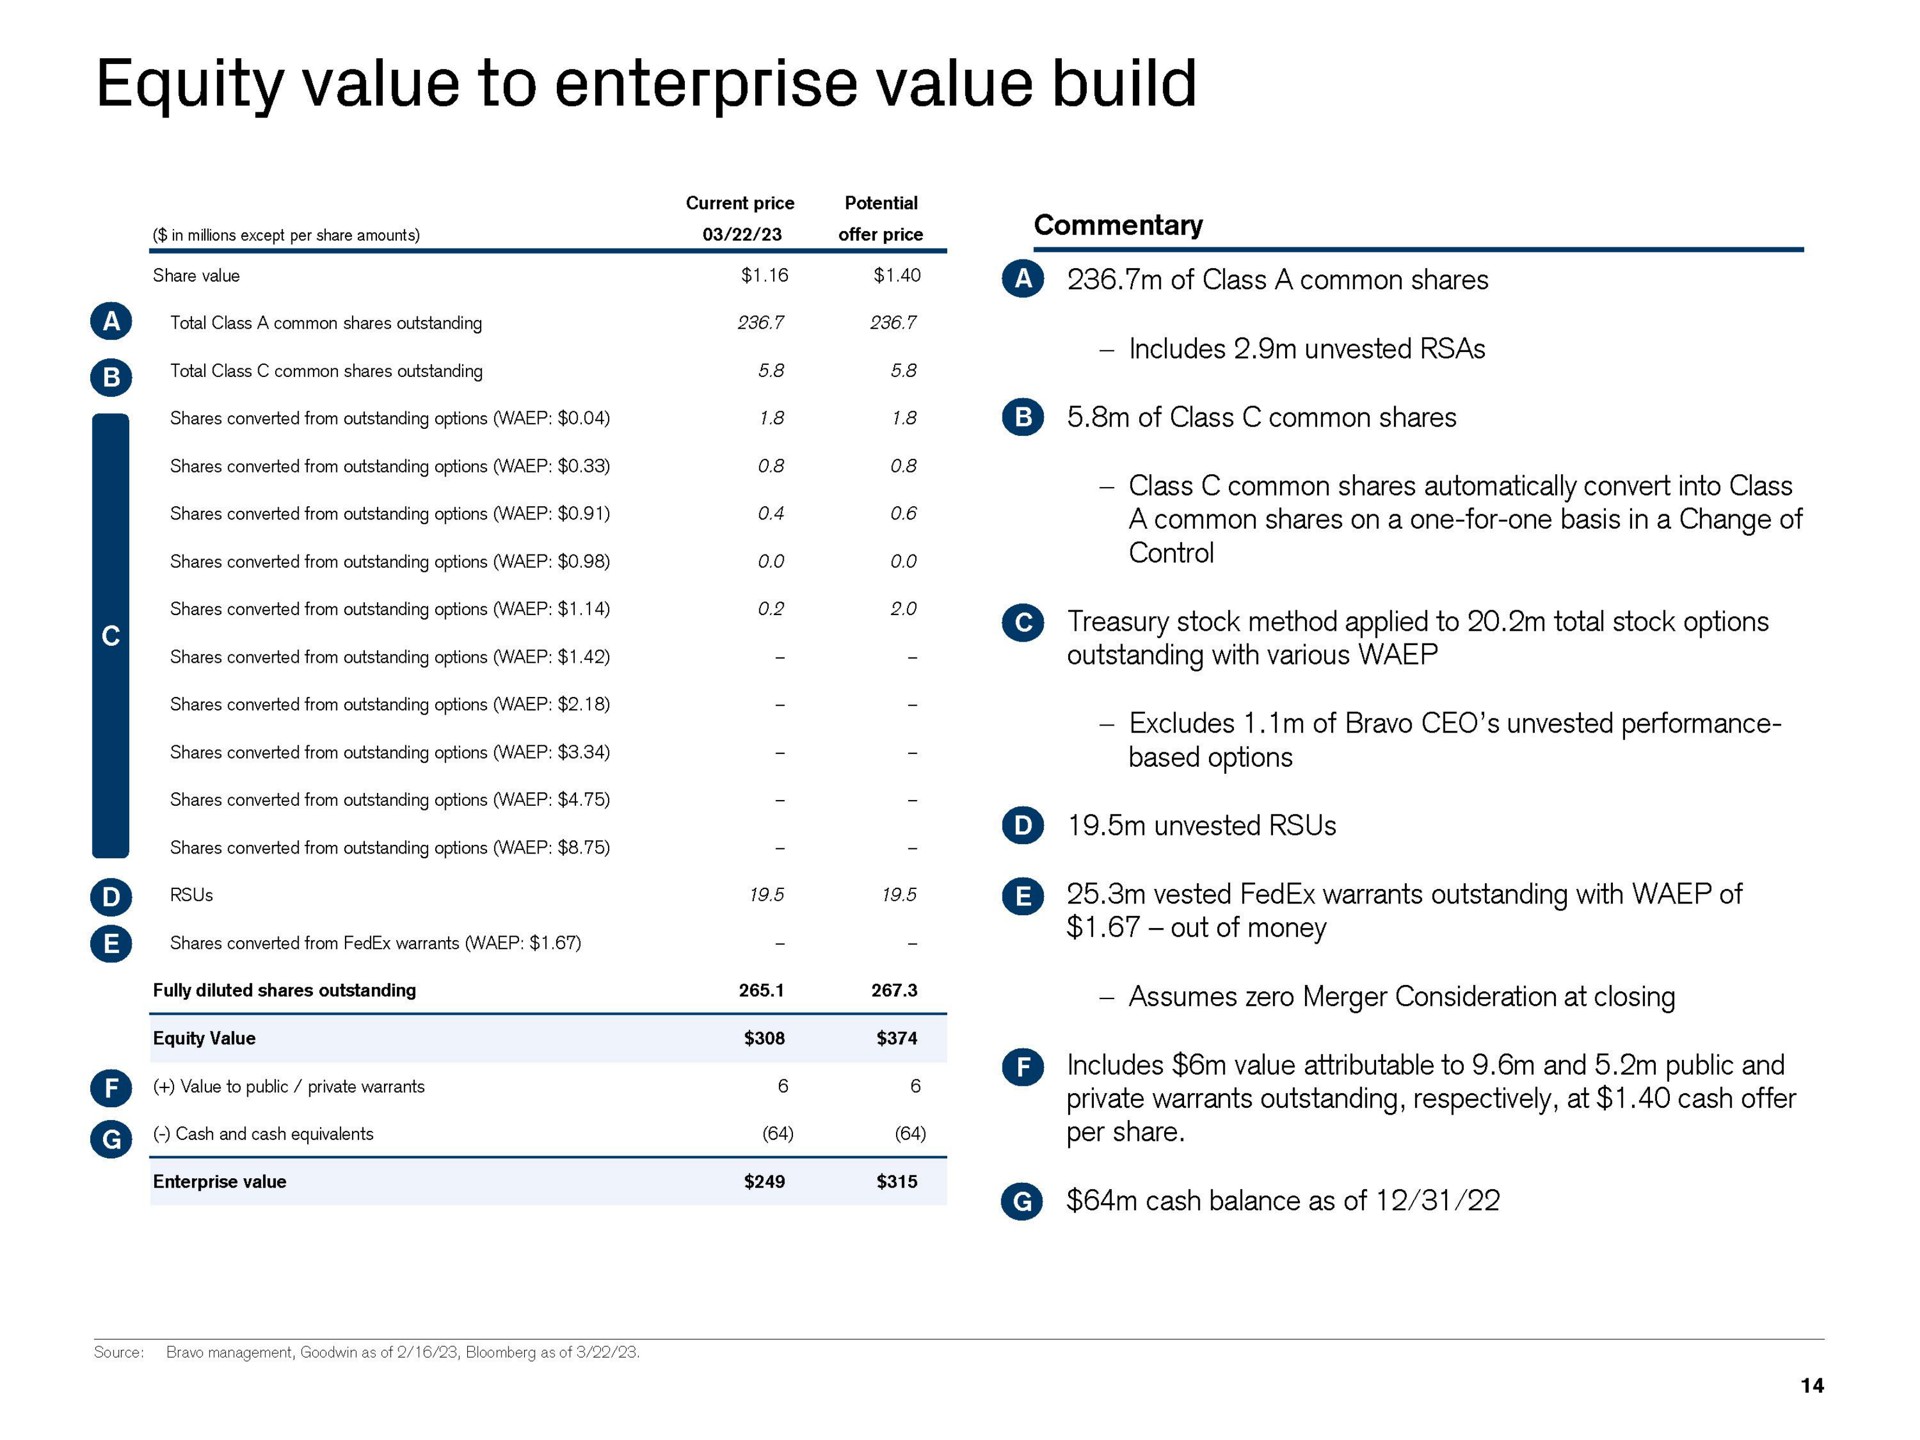 equity value to enterprise value build antes fir sore value to pubs or to pubic pile i of class a common shares includes unvested class common shares automatically convert into class treasury stock method applied to total stock options excludes of bravo unvested performance vested warrants outstanding with of out of money assumes zero merger consideration at closing includes value attributable to and public and private warrants outstanding respectively at cash offer cash balance as of | Credit Suisse